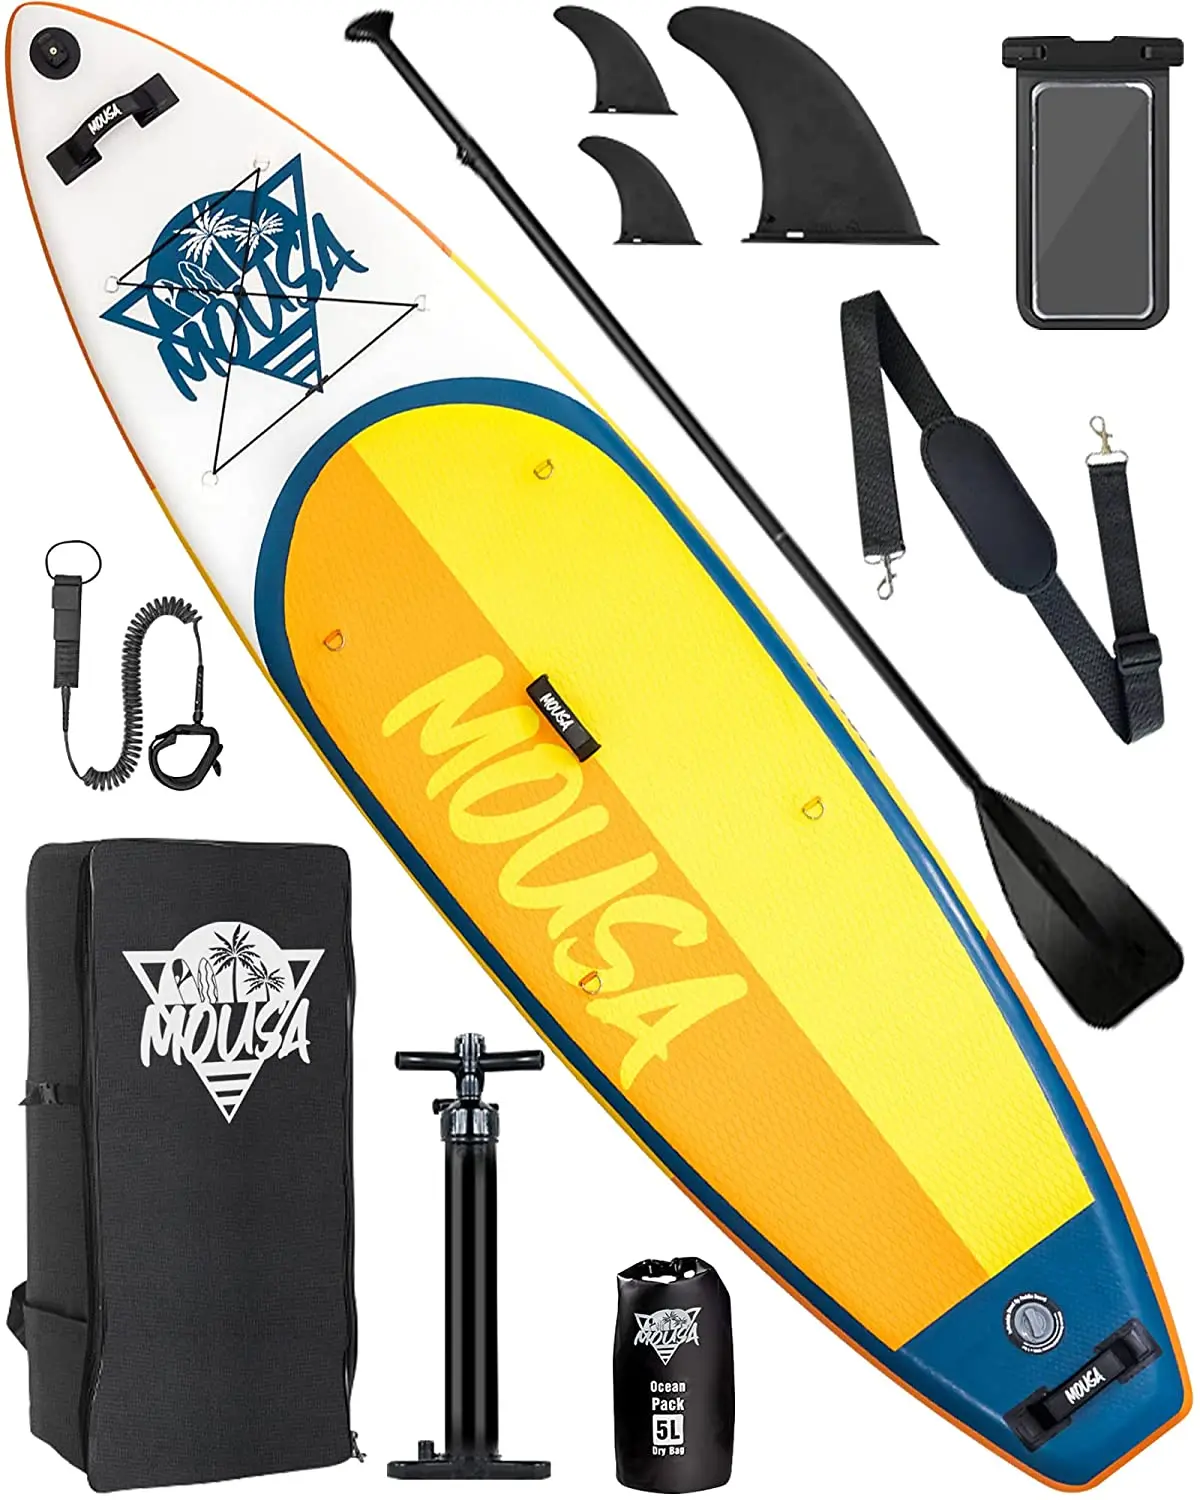 myboat stand up extra wide inflatable paddle board 11 ×33 ×6 removable fins backpack 2 blade floating paddles kayak seat Mousa Orange Waterproof Extra Wide Inflatable Board 10'8×33